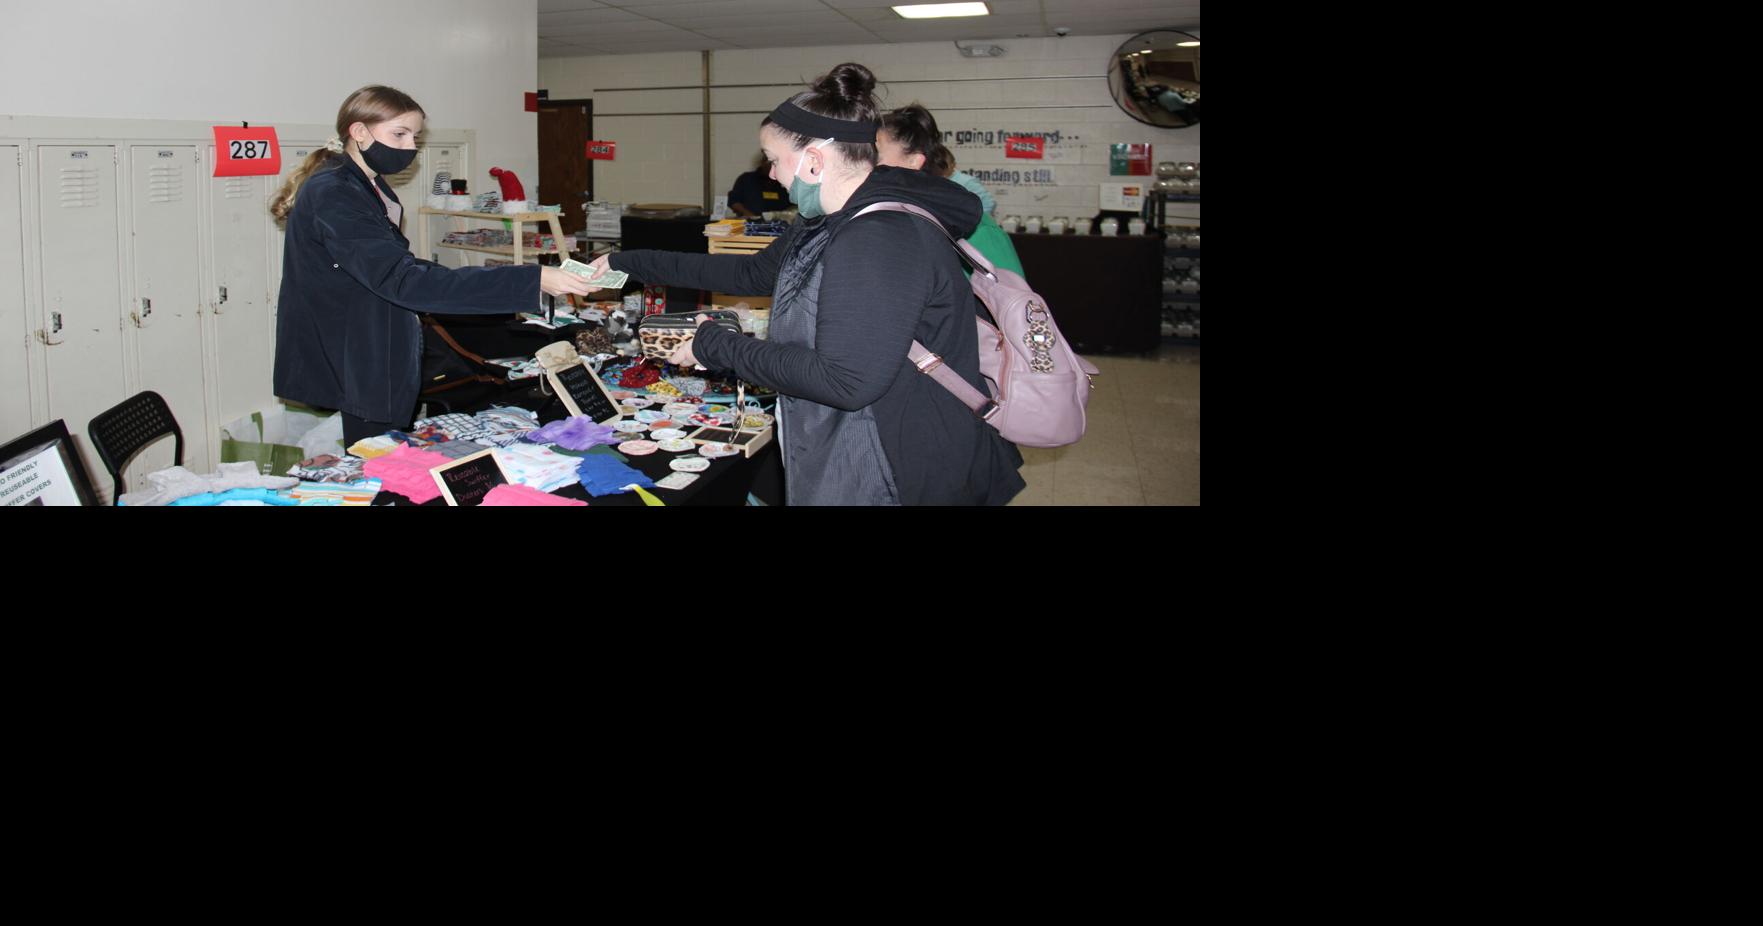 PHOTO GALLERY Union Middle School Craft Fair back for 37th time Fair